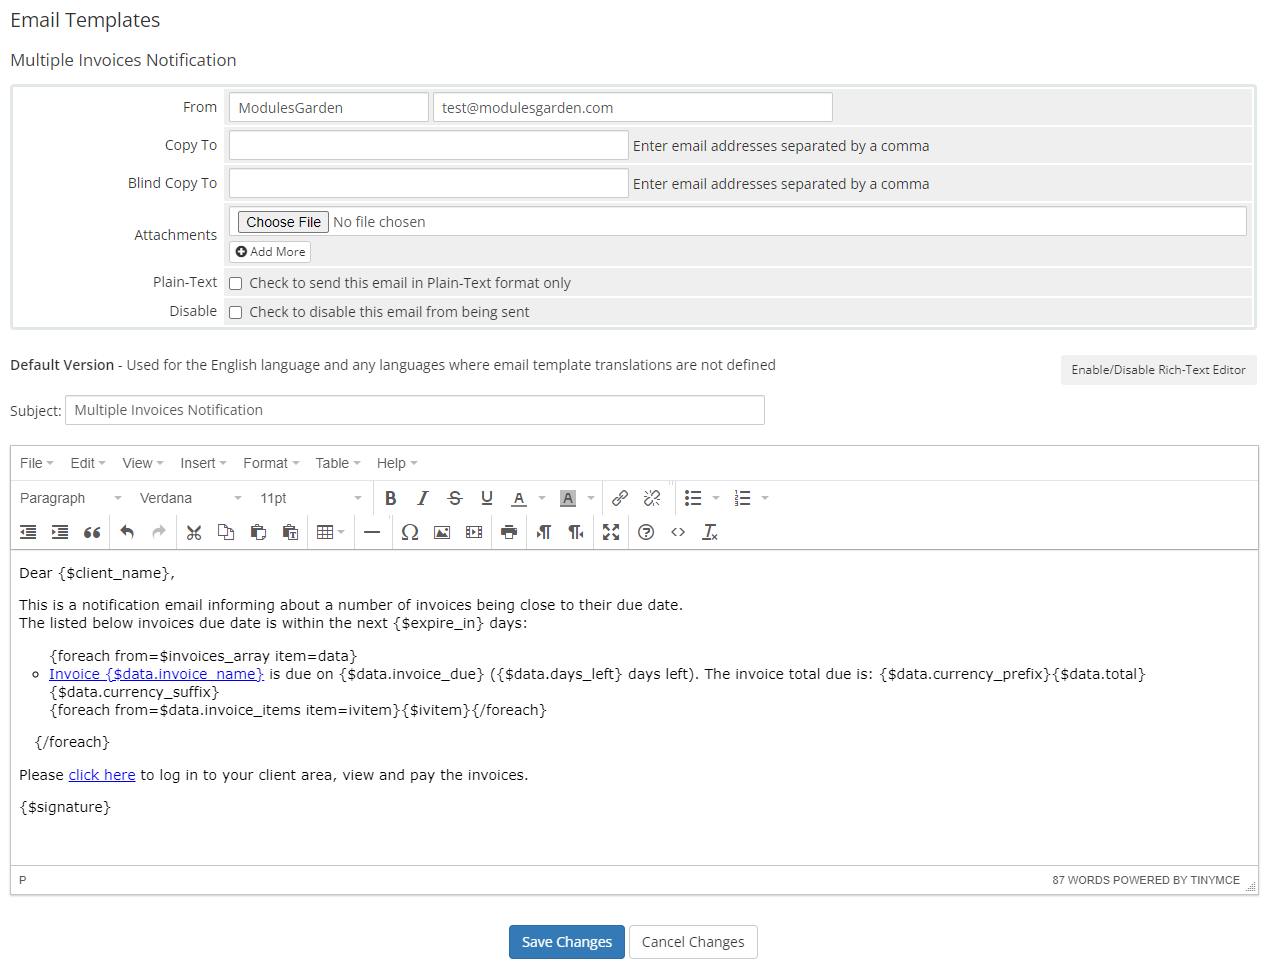 Email Notifications Organizer For WHMCS: Module Screenshot 4